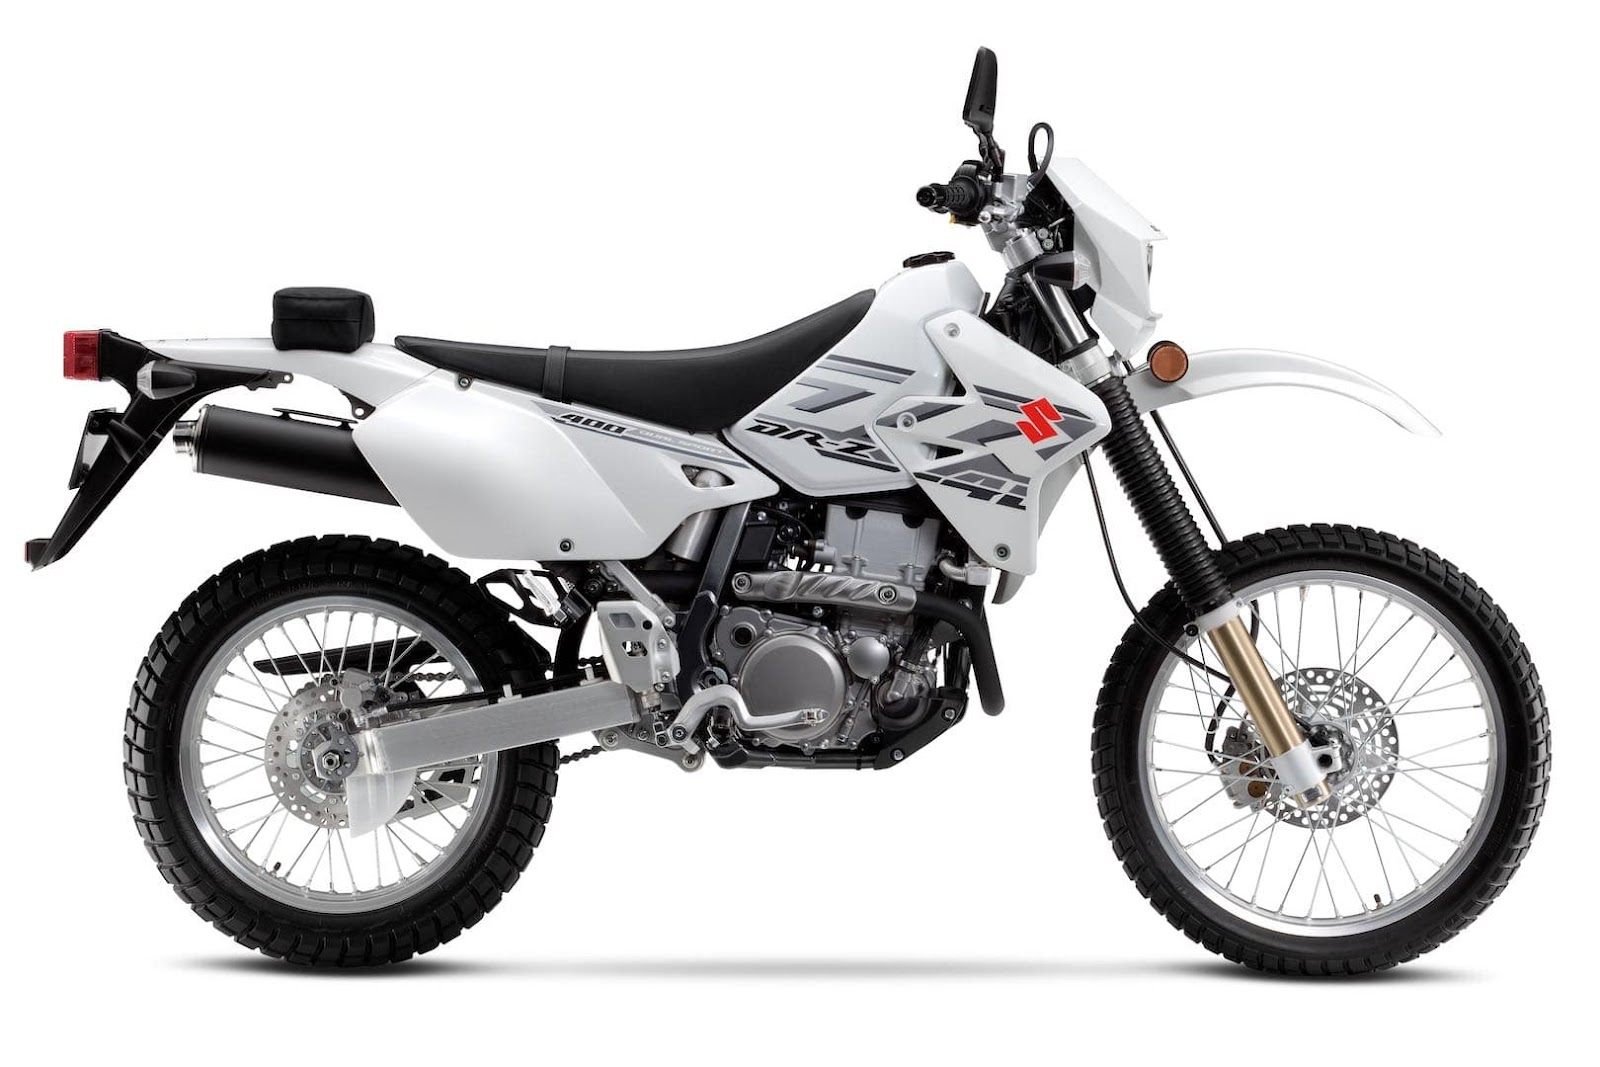 Experience the ultimate adventure with the Suzuki DR-Z400S